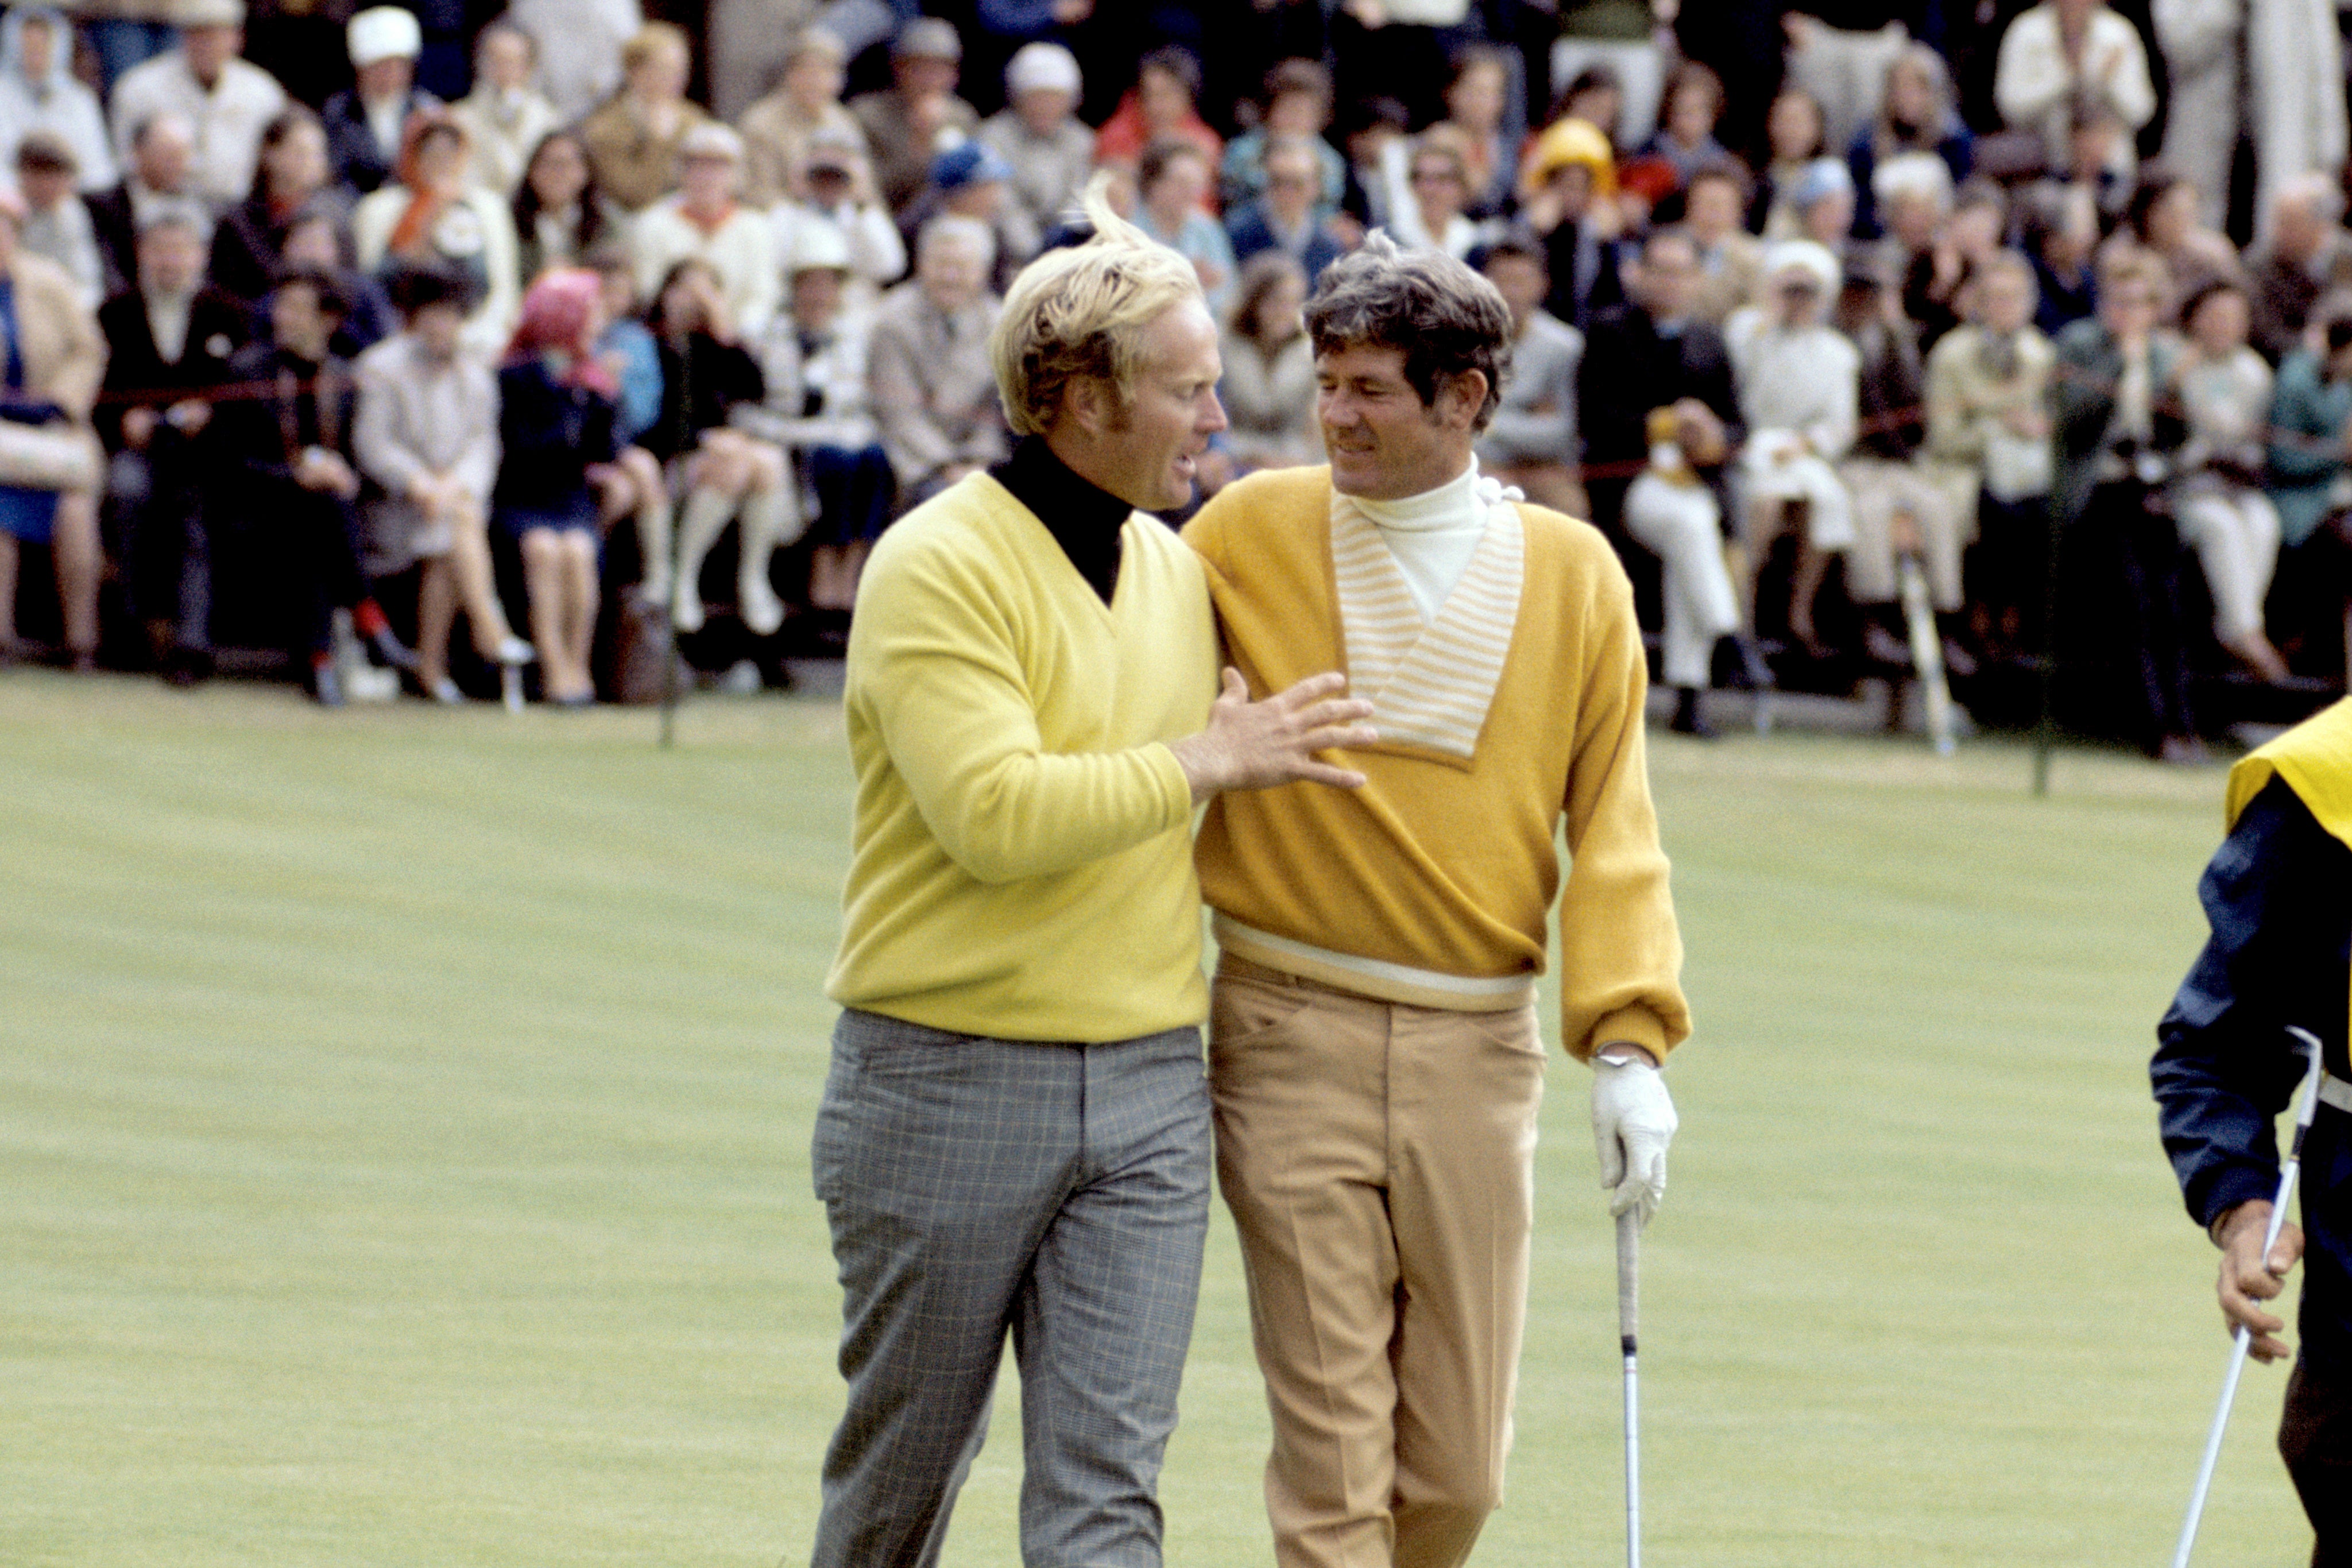 Doug Sanders, right, lost a play-off for the 1970 Open to Jack Nicklaus, left, following a 72nd-hole bogey (PA Archive)